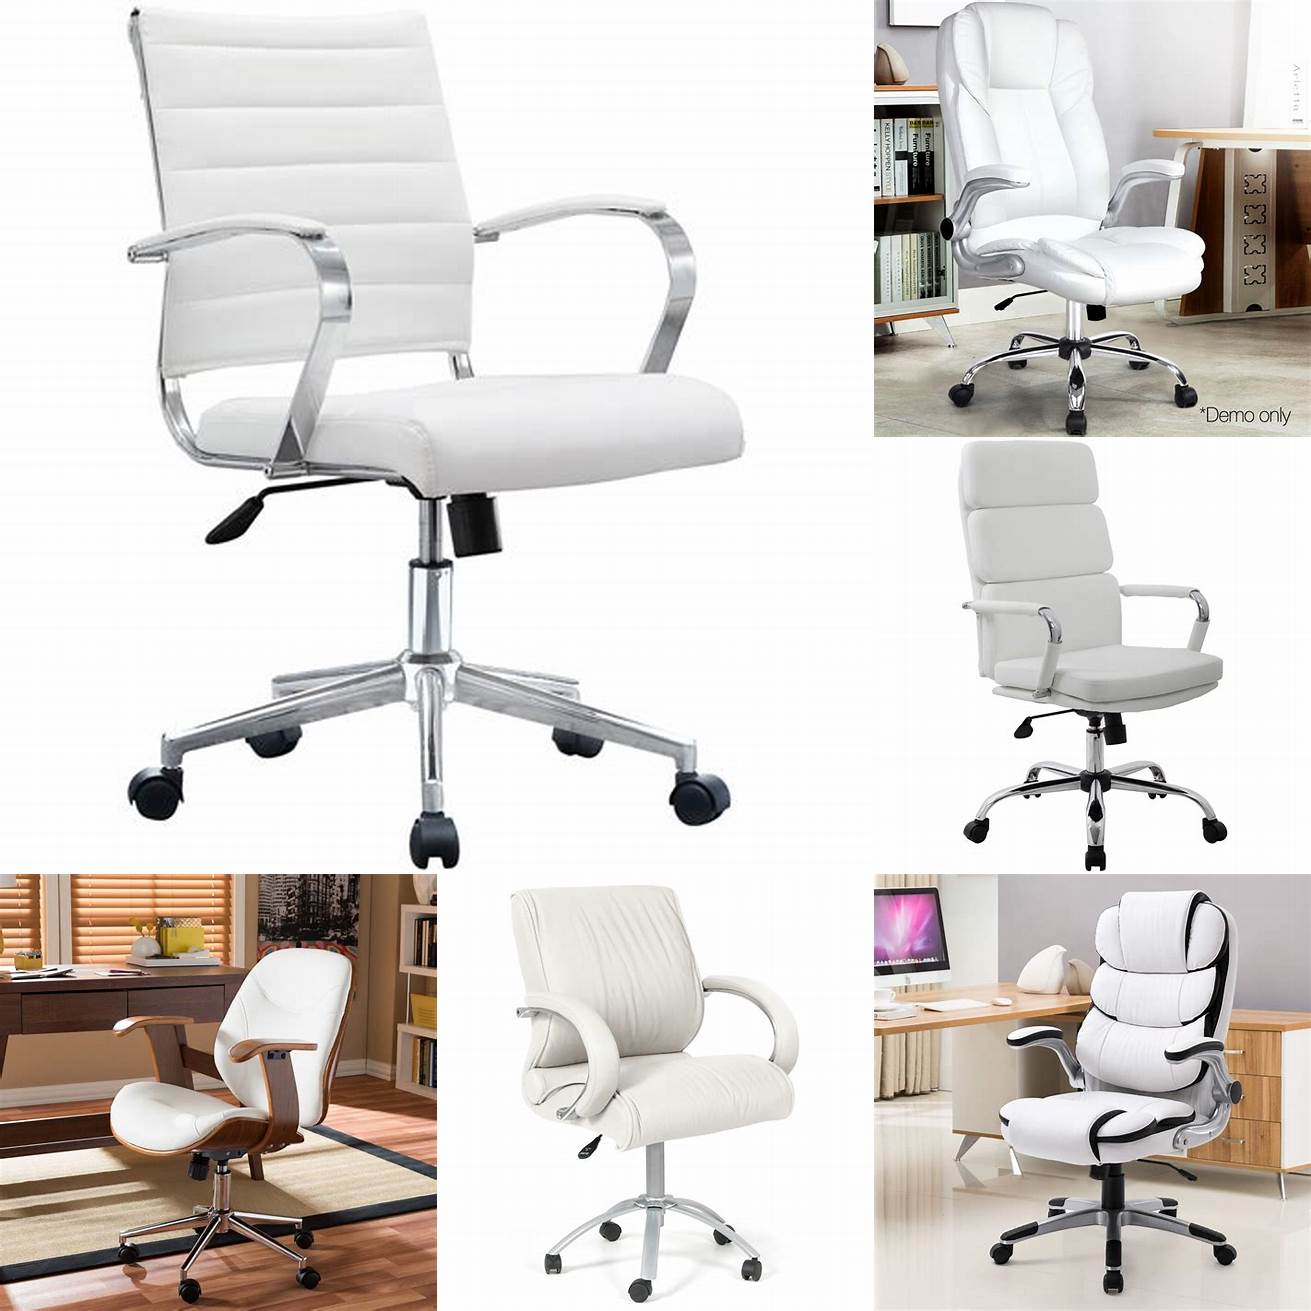 Side view of the White Leather Office Chair